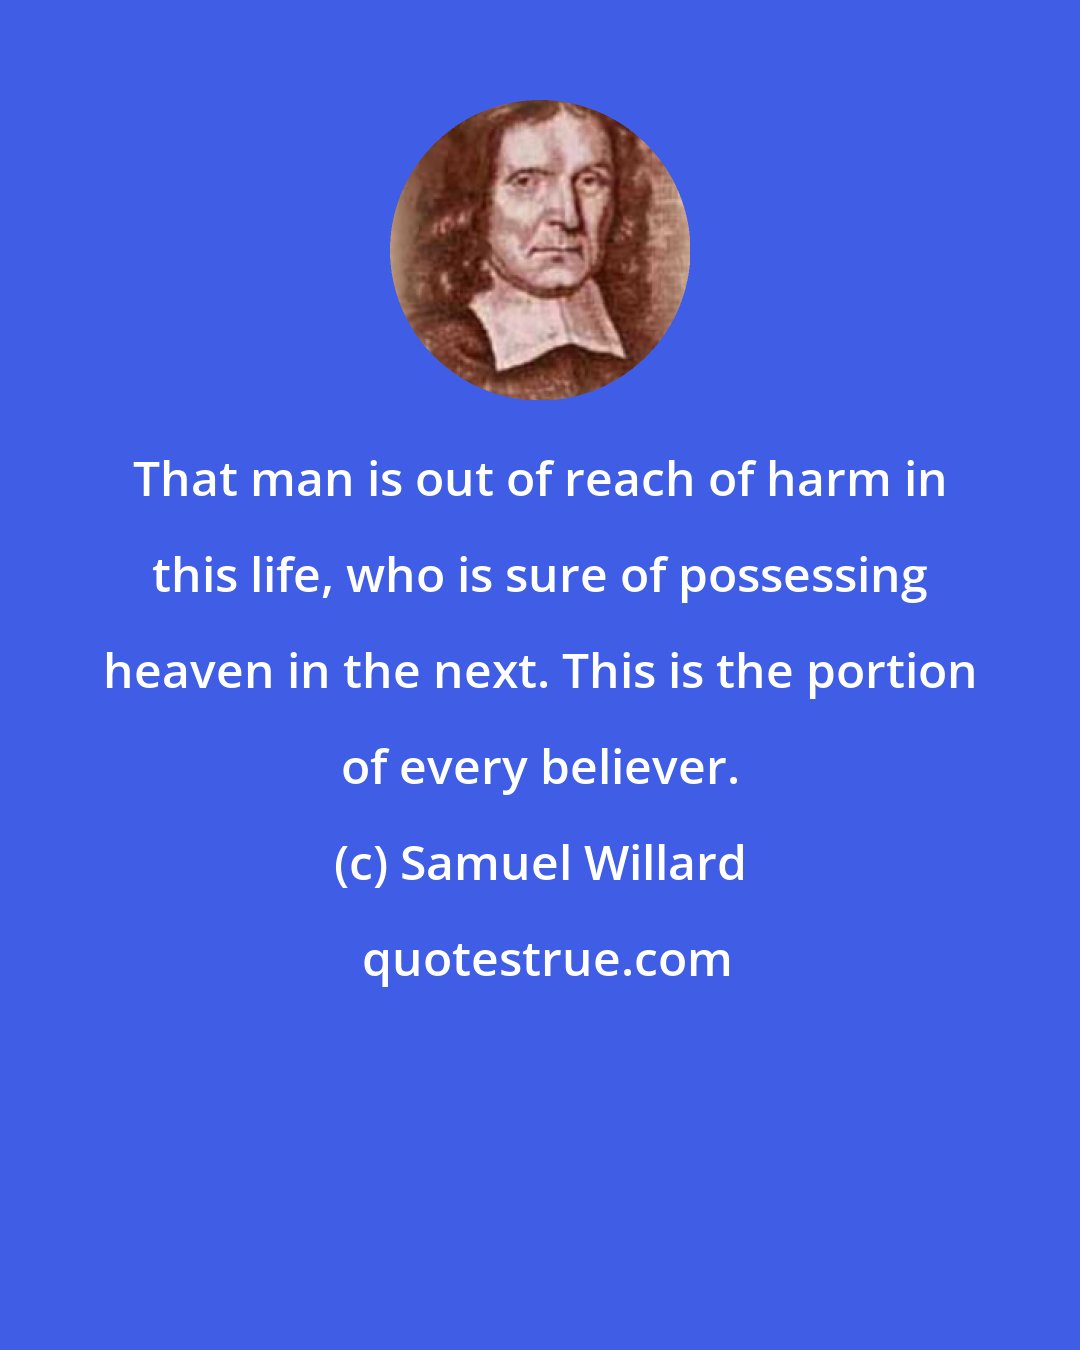 Samuel Willard: That man is out of reach of harm in this life, who is sure of possessing heaven in the next. This is the portion of every believer.